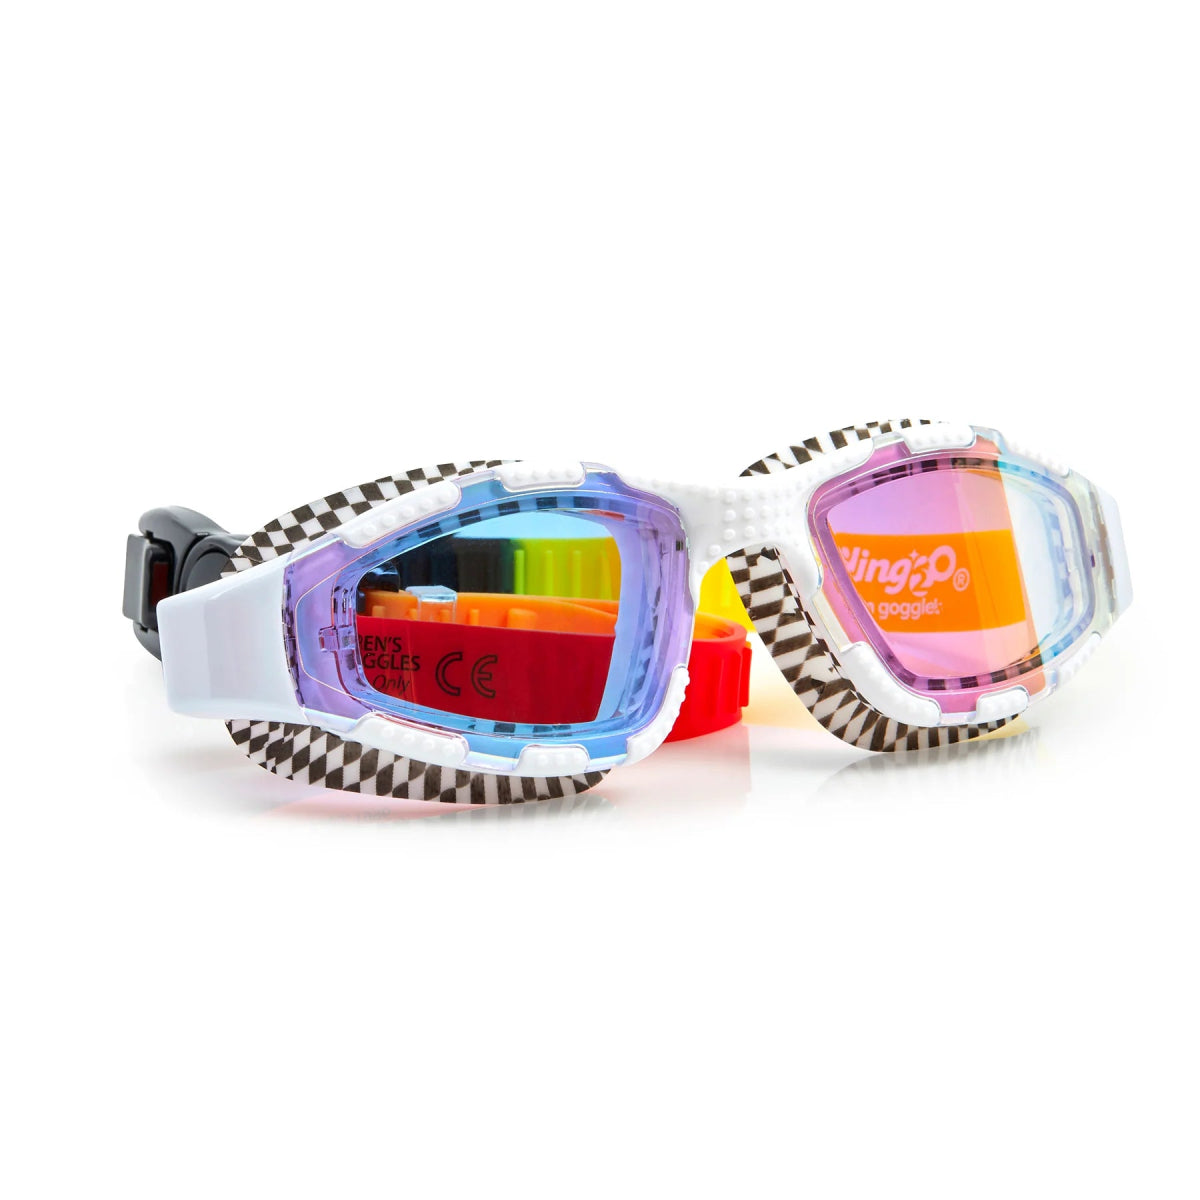 HIGH DIVE STREET VIBE GOGGLES (PREORDER) - BLING2O